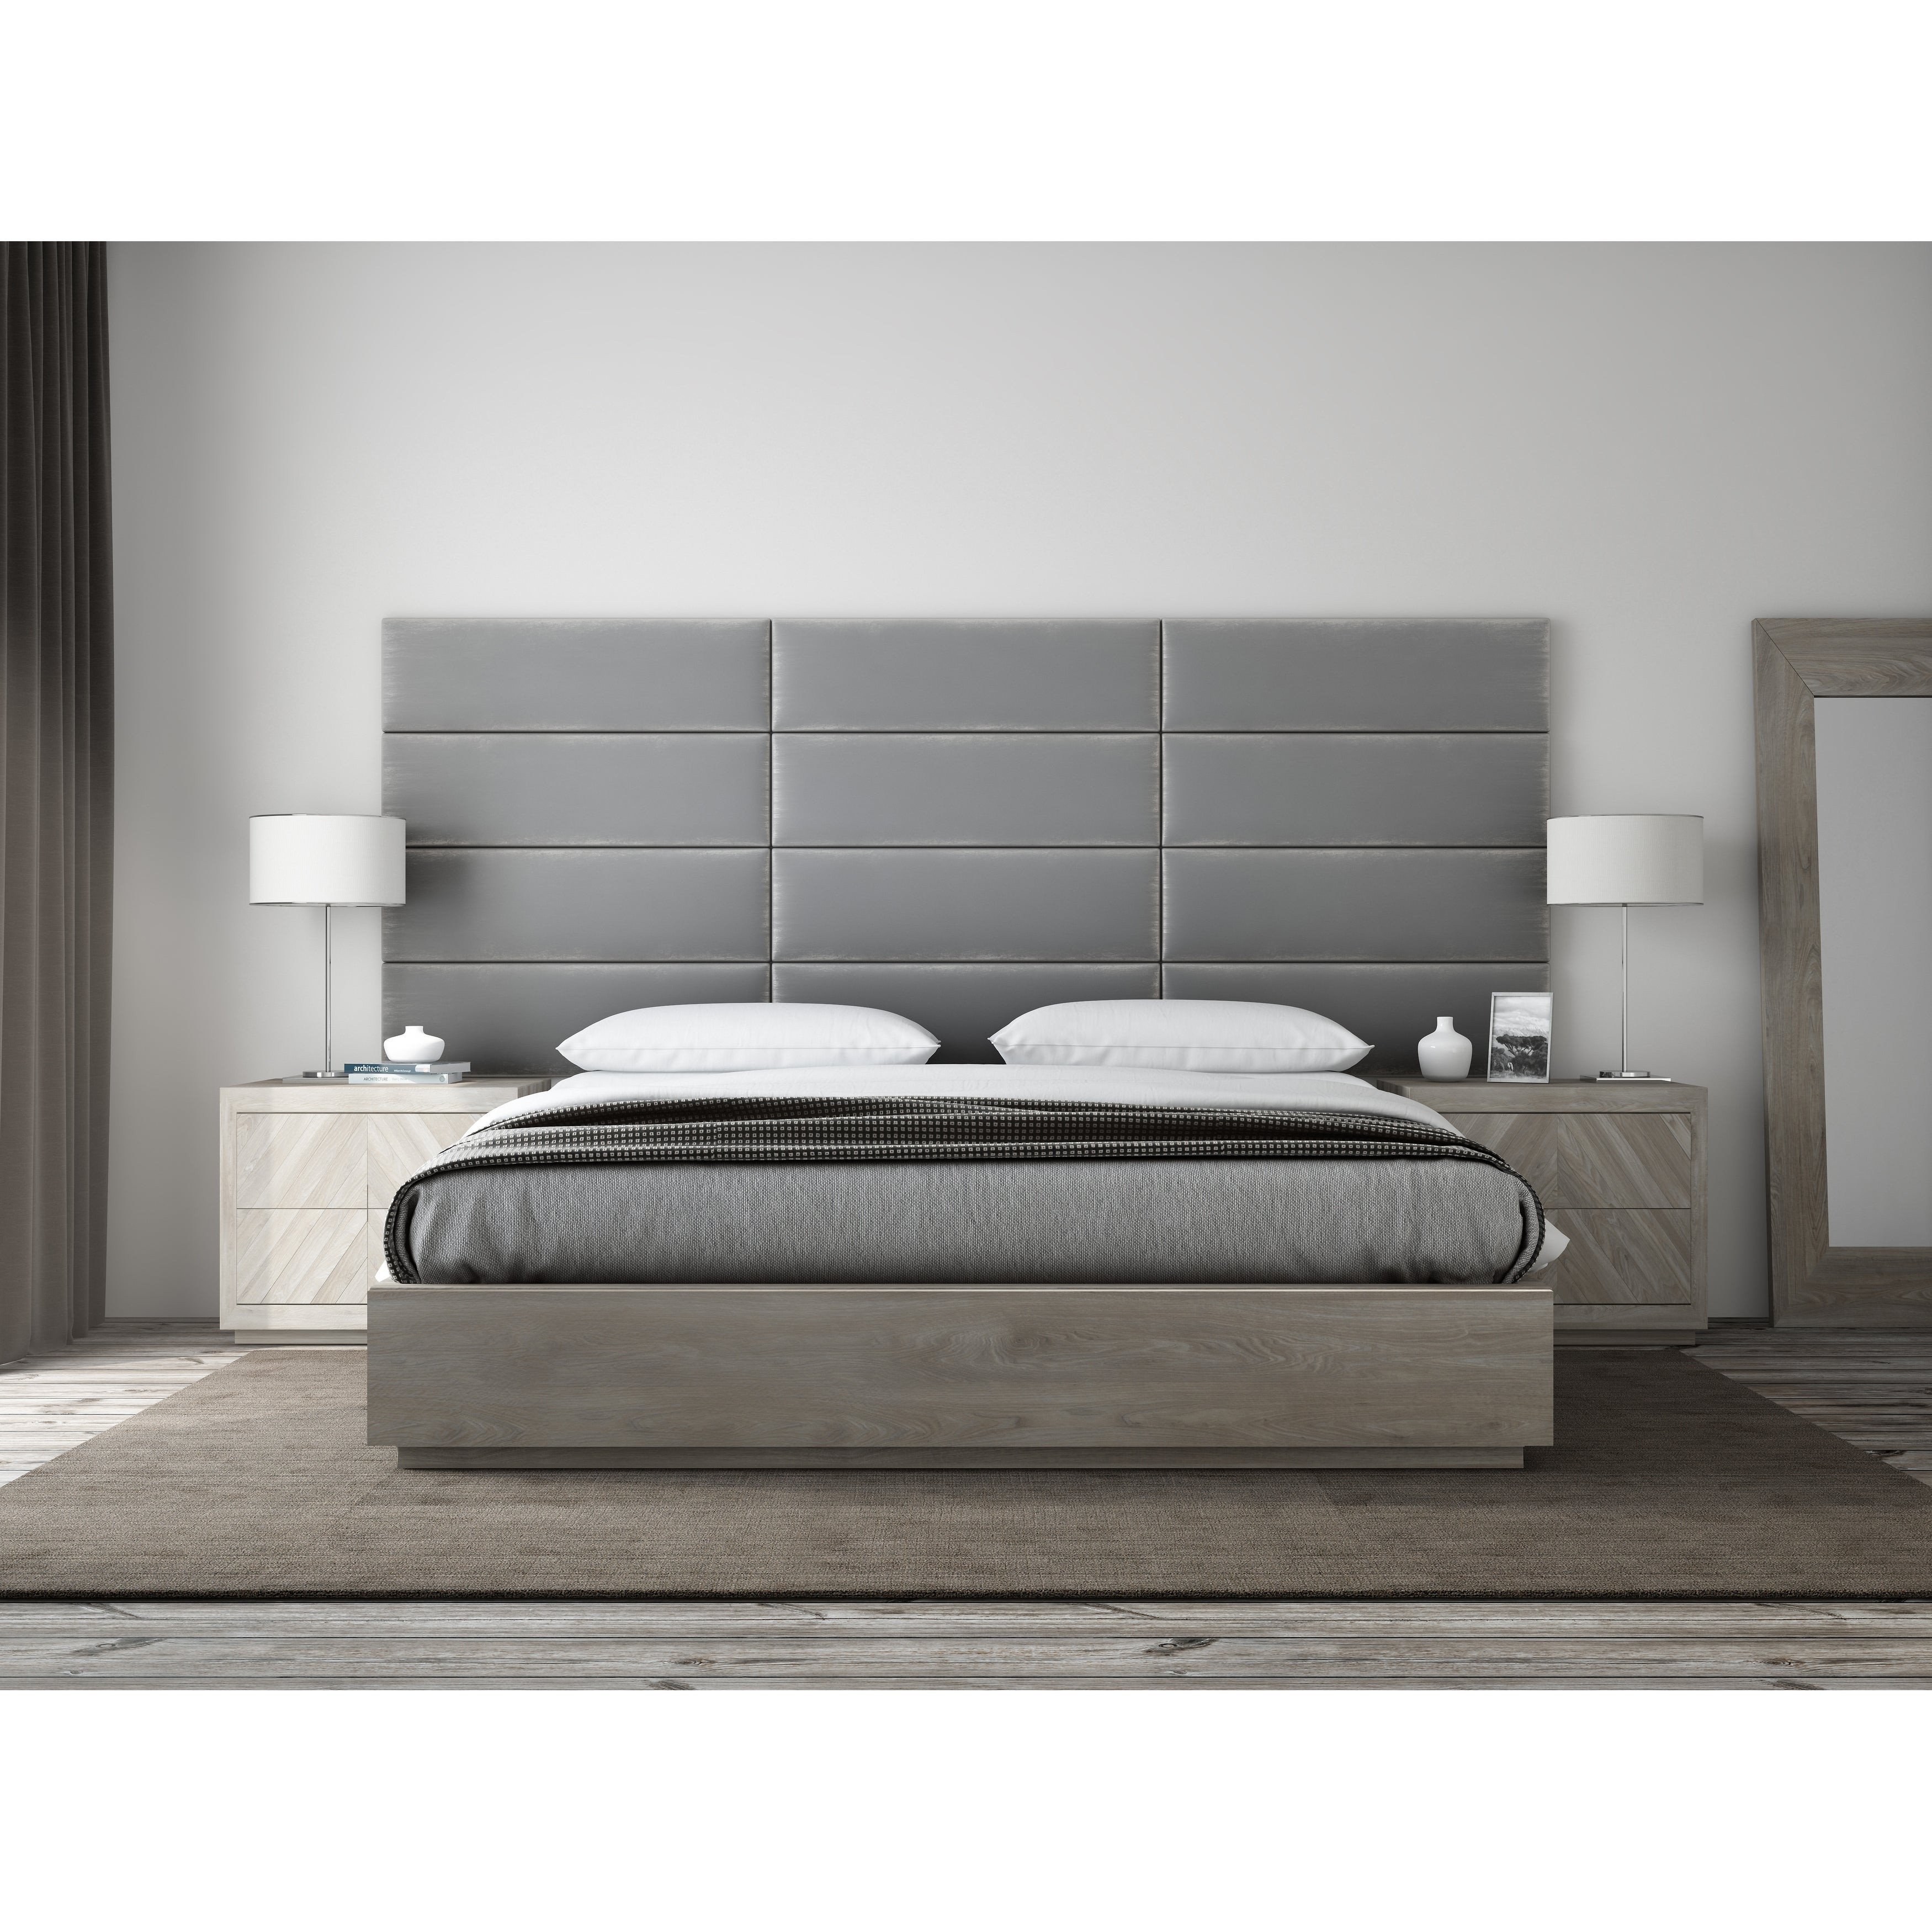 Grey Accent Wall Bedroom Fresh Vant Upholstered Headboards Accent Wall Panels Packs 4 Plush Velvet Smoke Gray 39&quot; Wide X 11 5&quot; Height